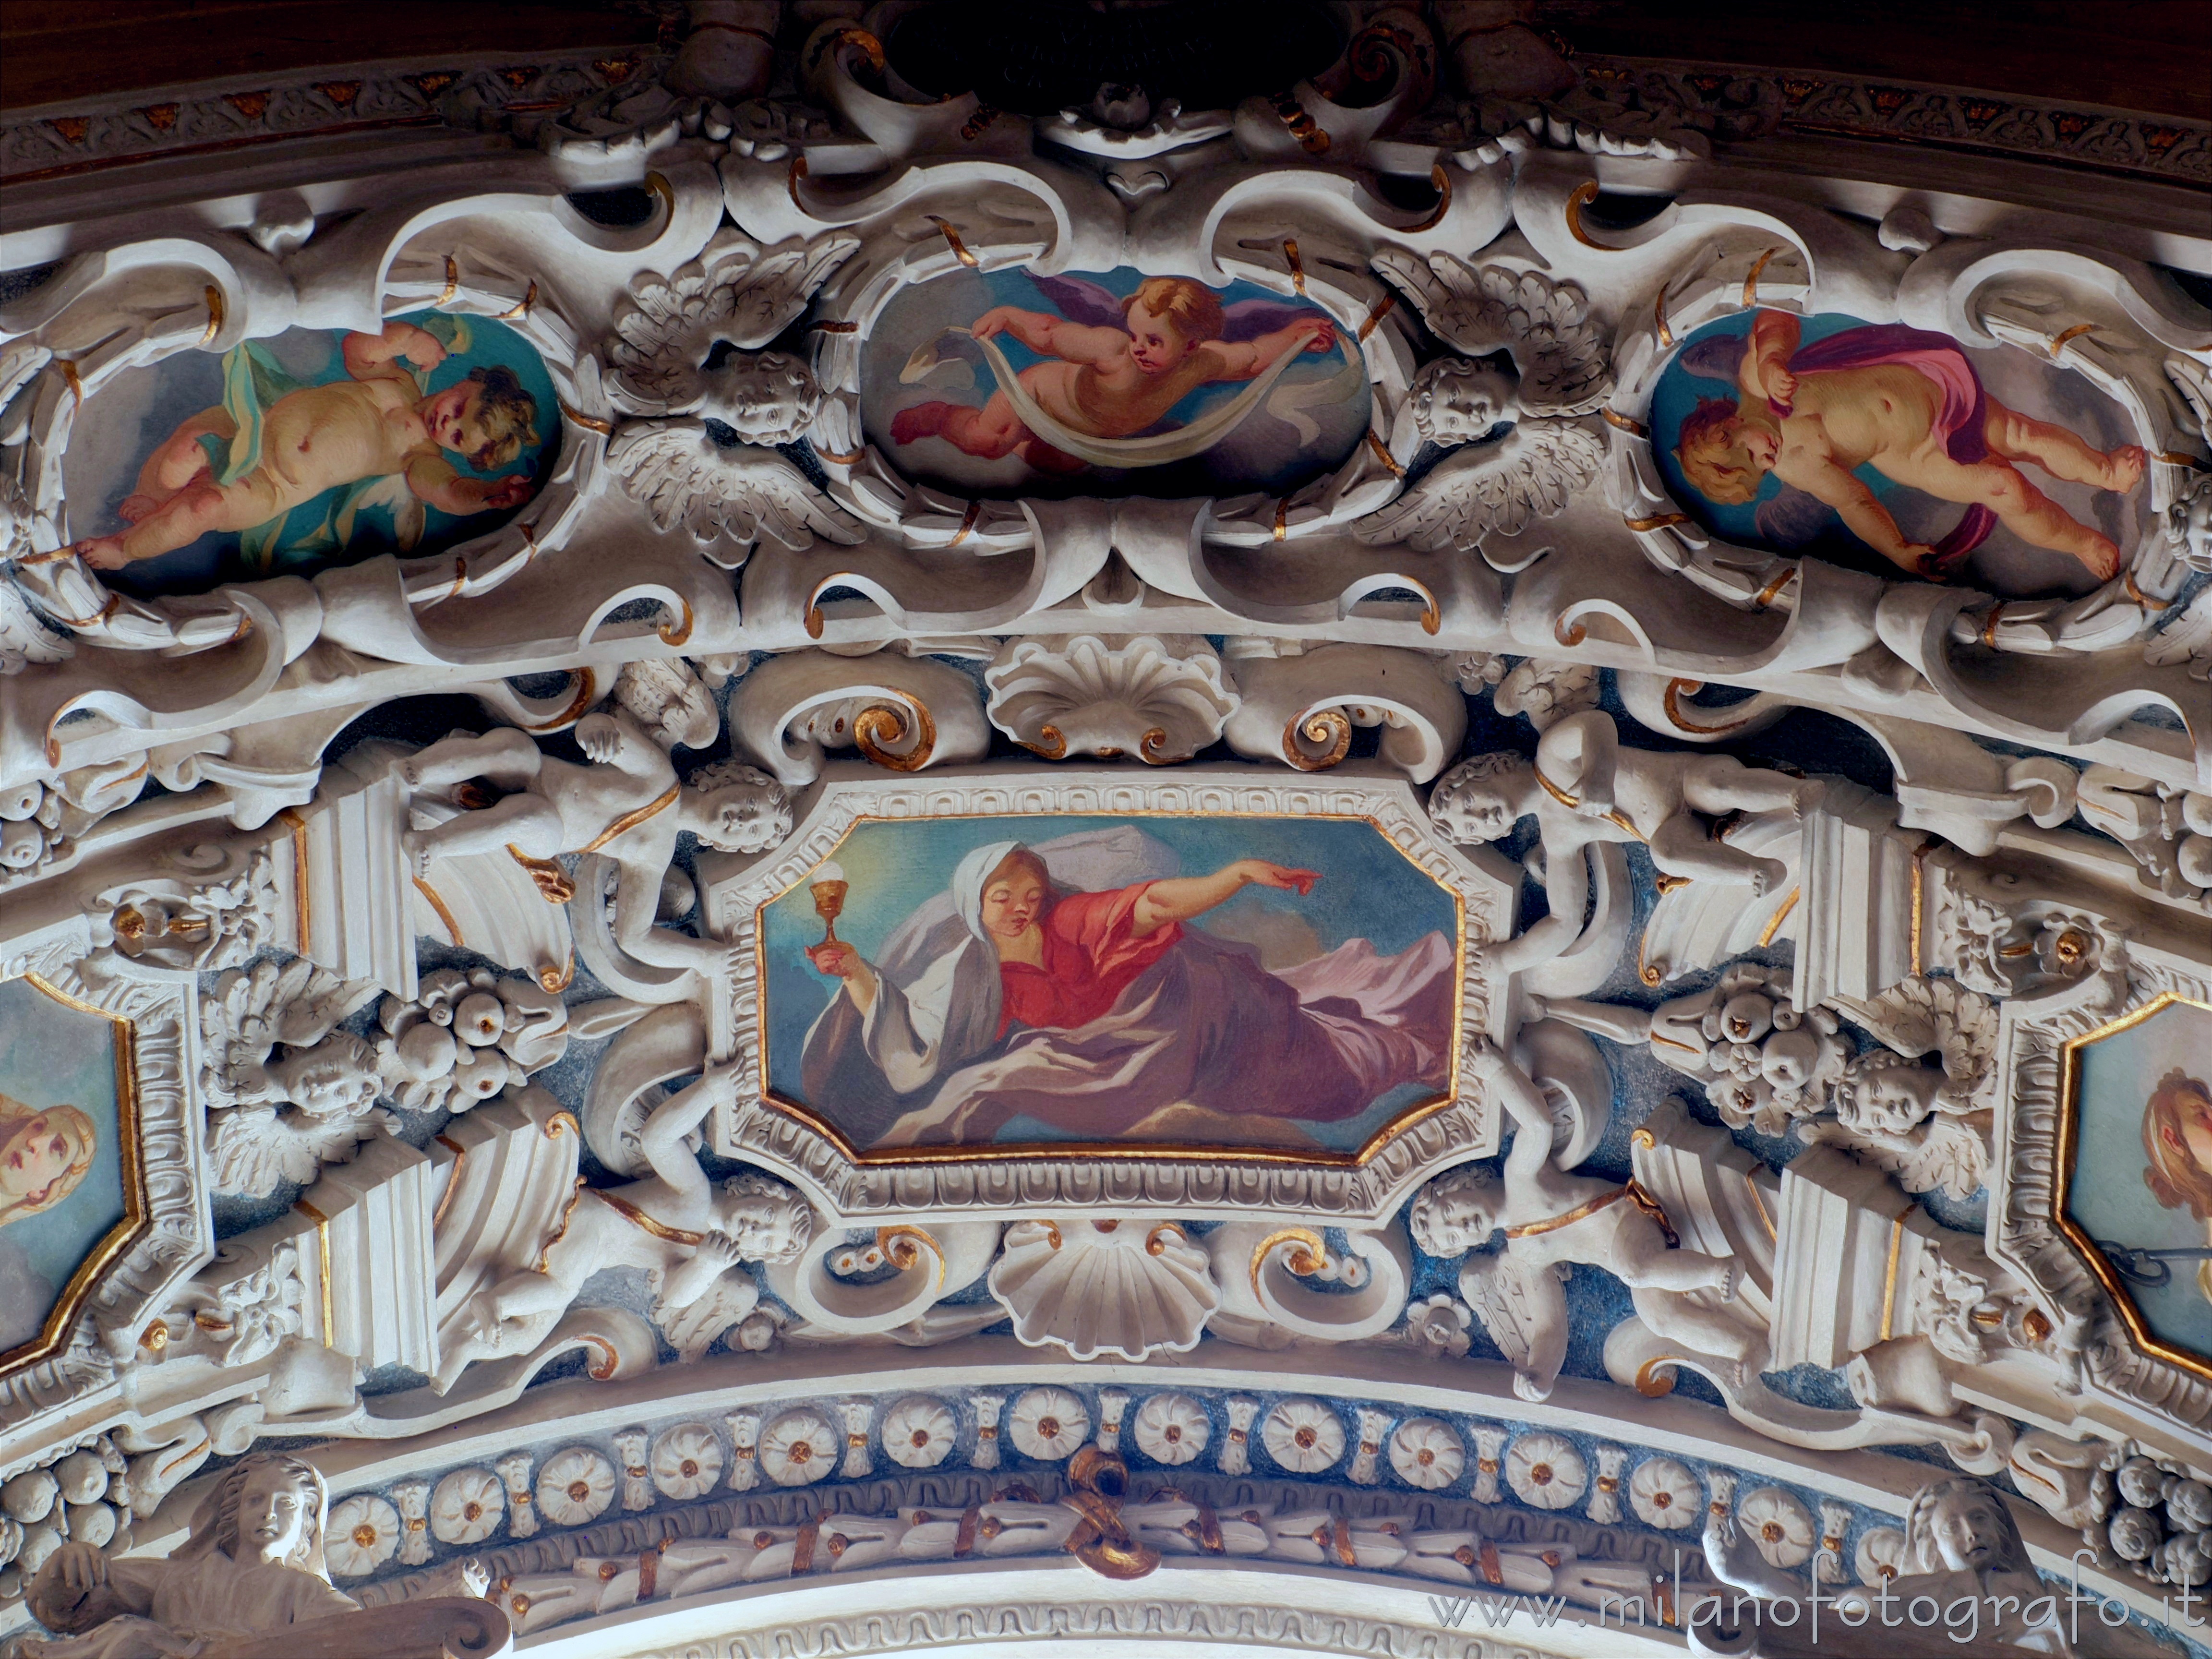 Vimercate (Monza e Brianza, Italy): Stuccos on the vault of the Chapel of Santa Caterina in the Sanctuary of the Blessed Virgin of the Rosary - Vimercate (Monza e Brianza, Italy)